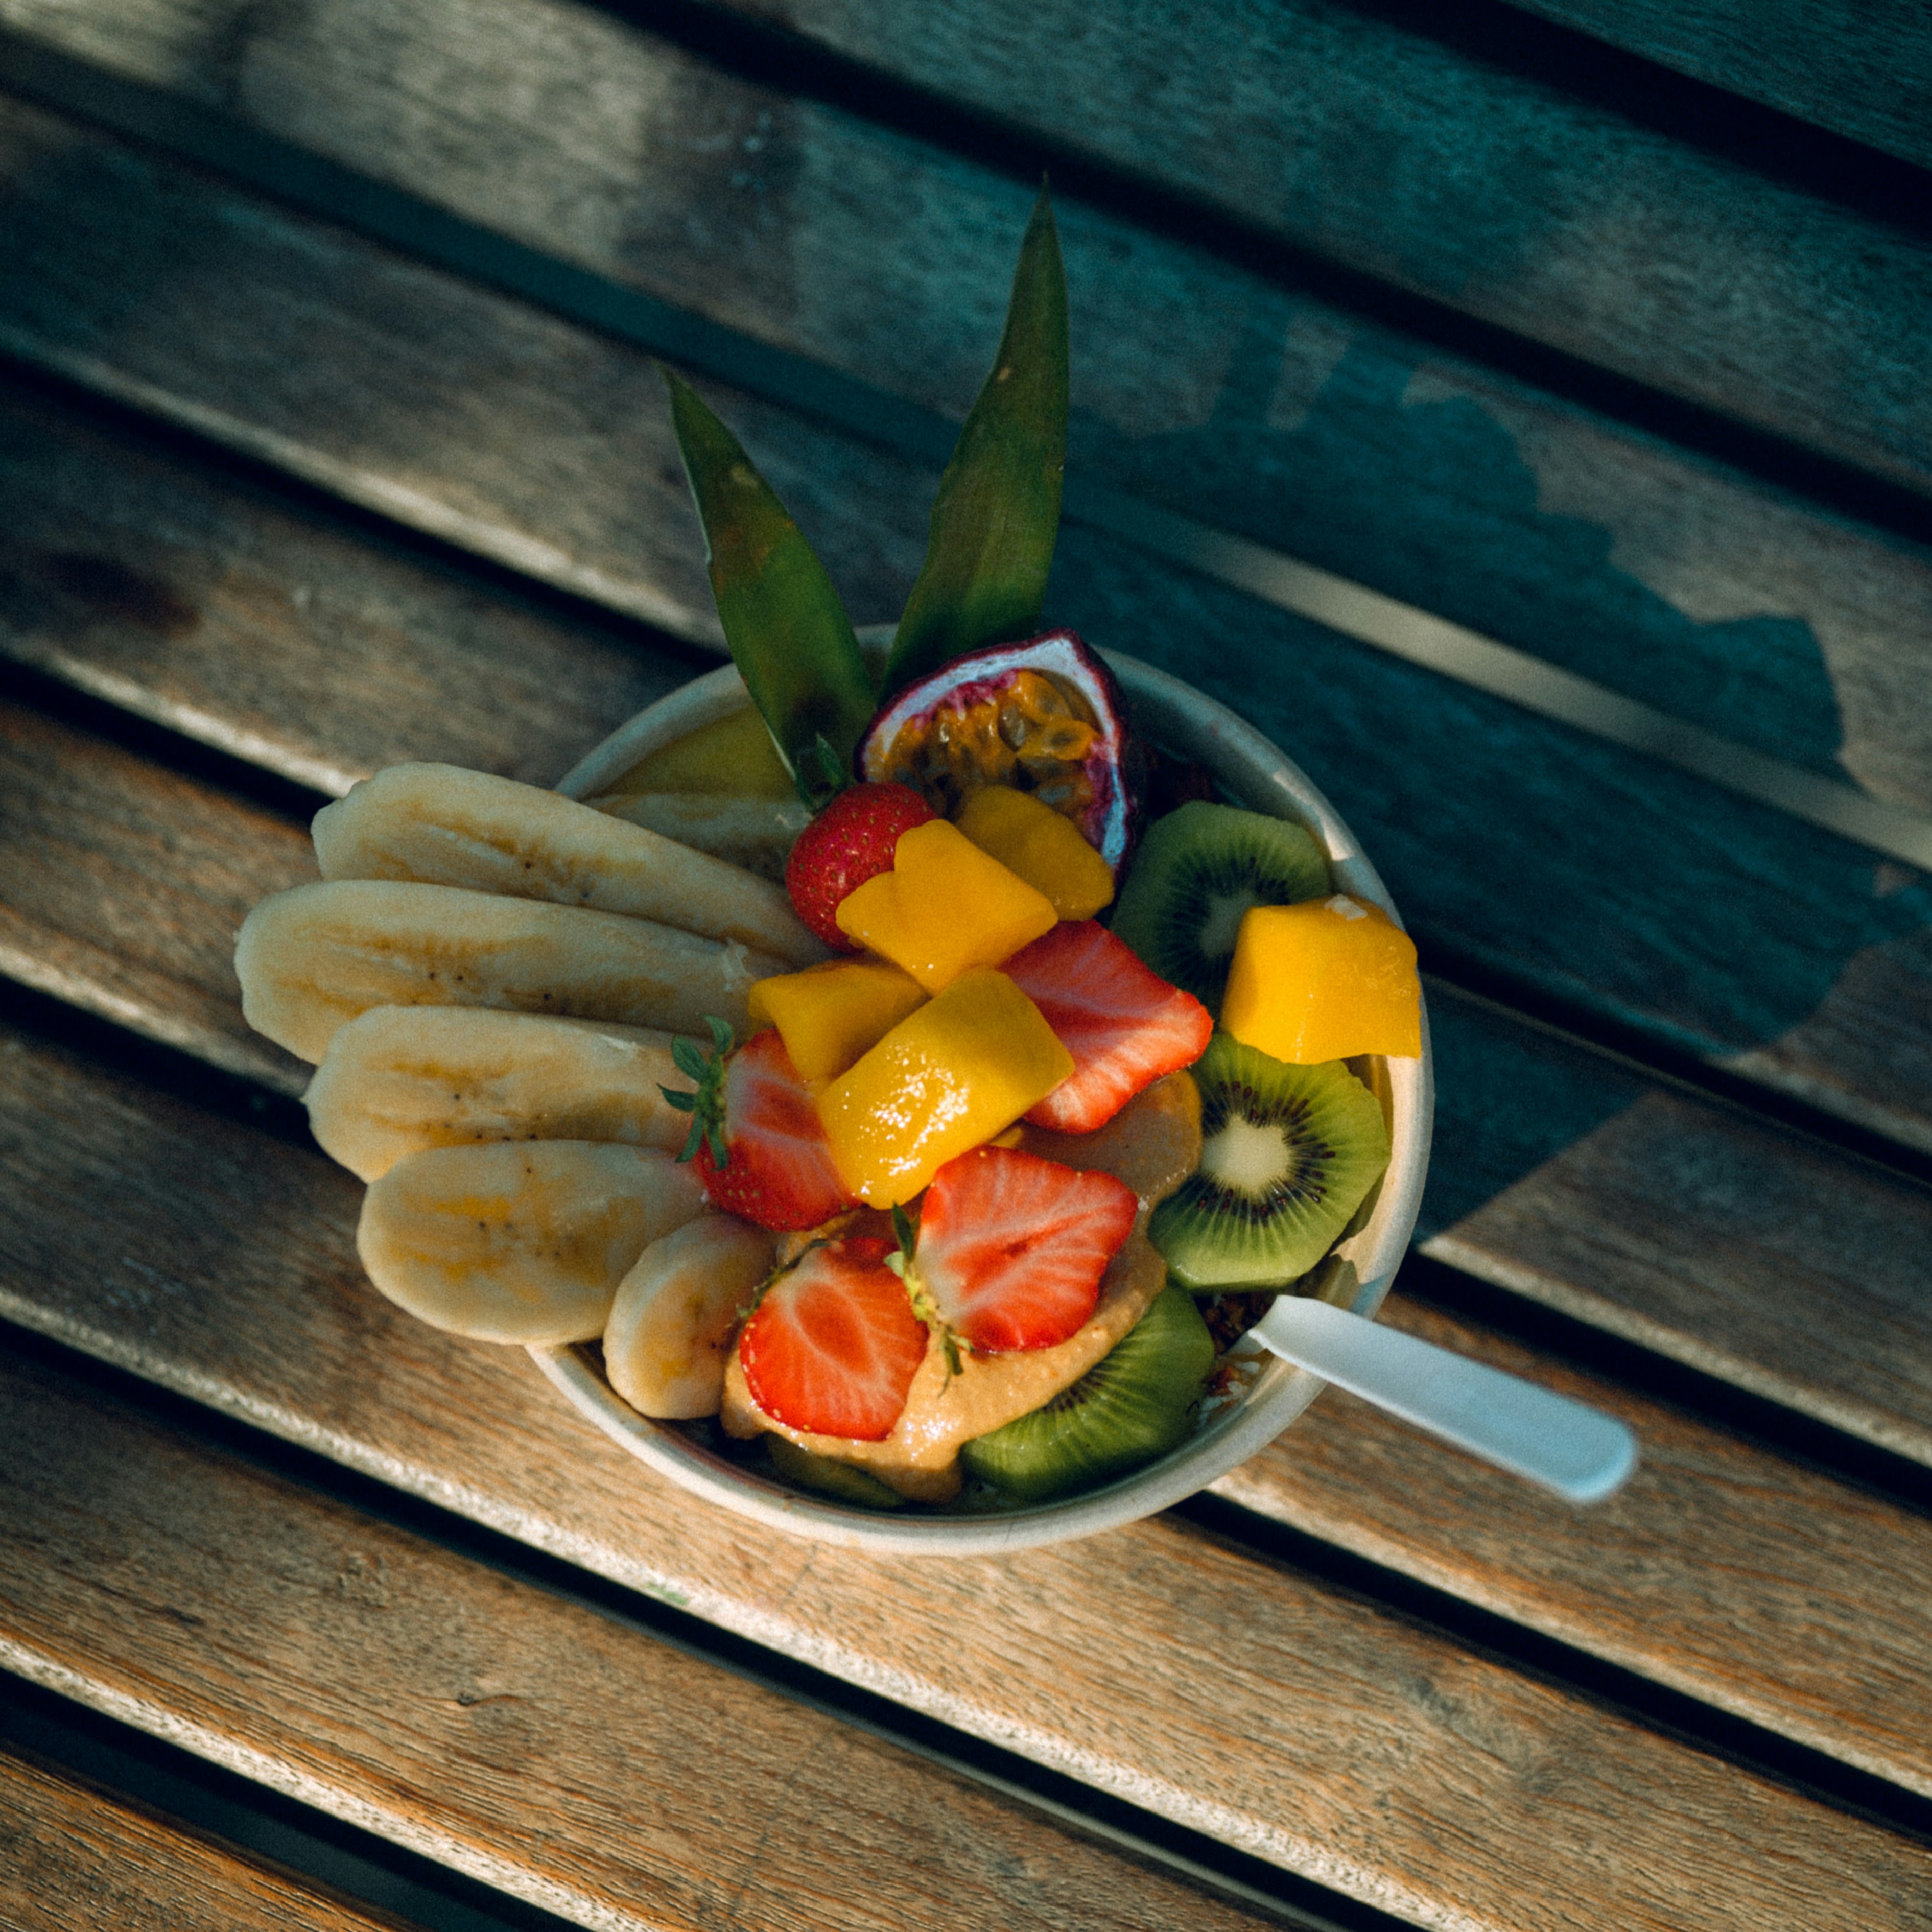 A bowl with starwberries, mango, kiwi and bananas for a more healthy option.